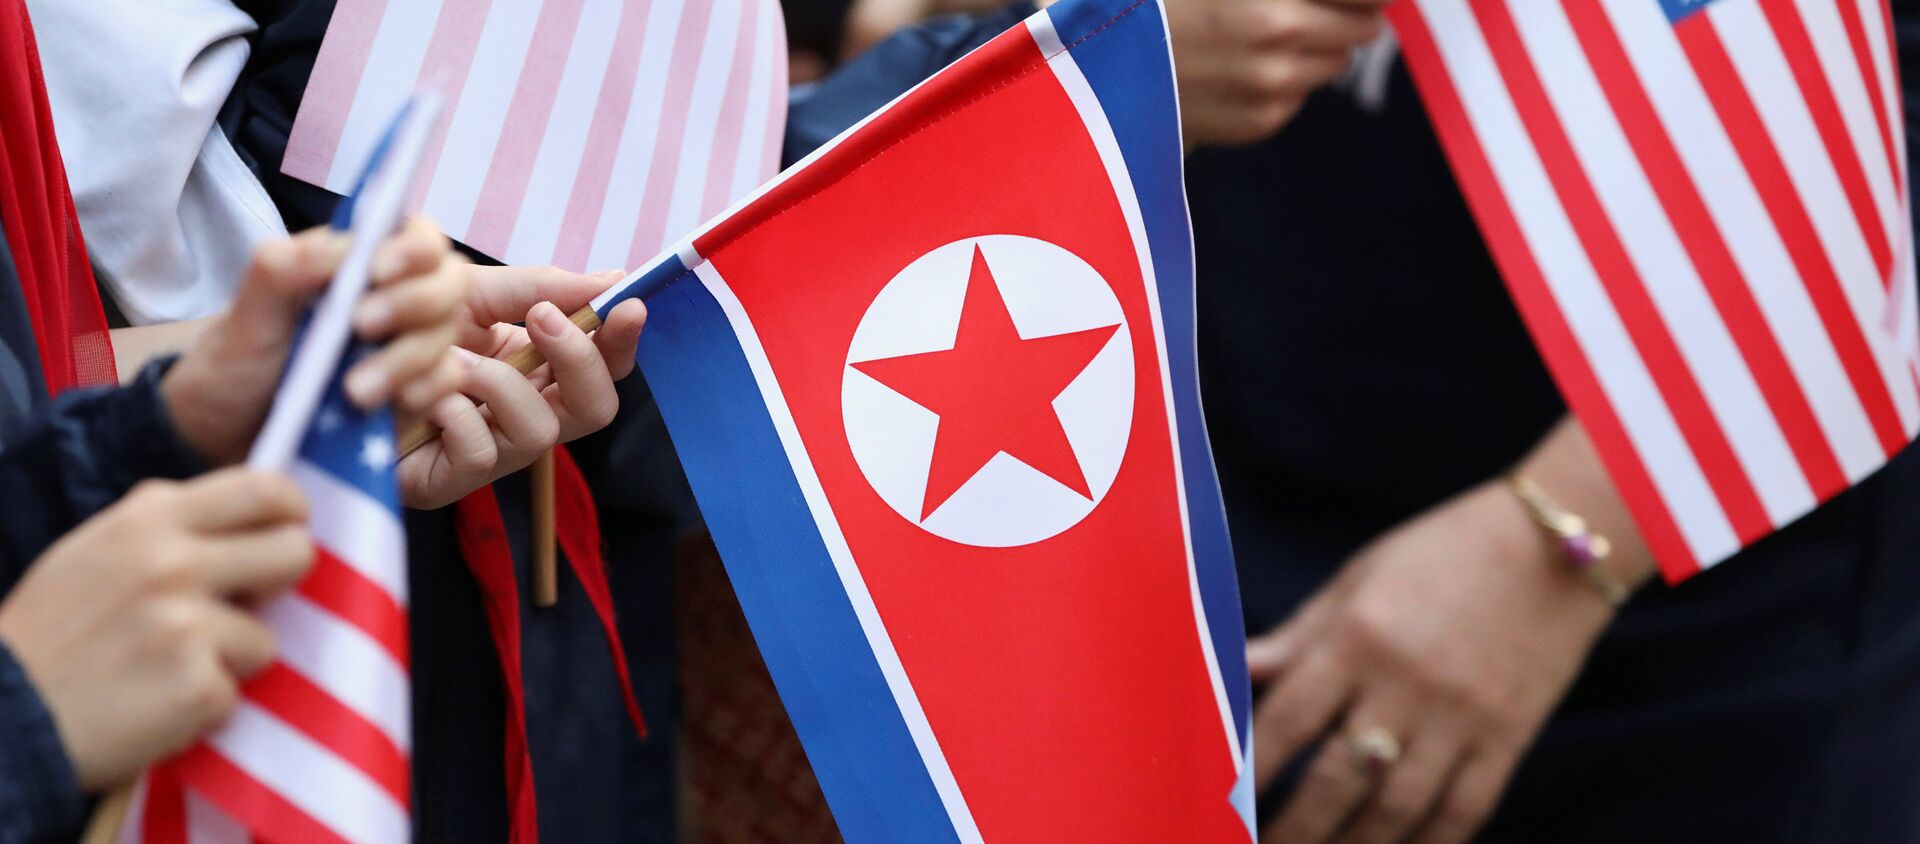 Bystanders holding North Korea and U.S. flags wait for the motorcade of U.S. President Donald Trump in Hanoi - 俄羅斯衛星通訊社, 1920, 21.06.2021